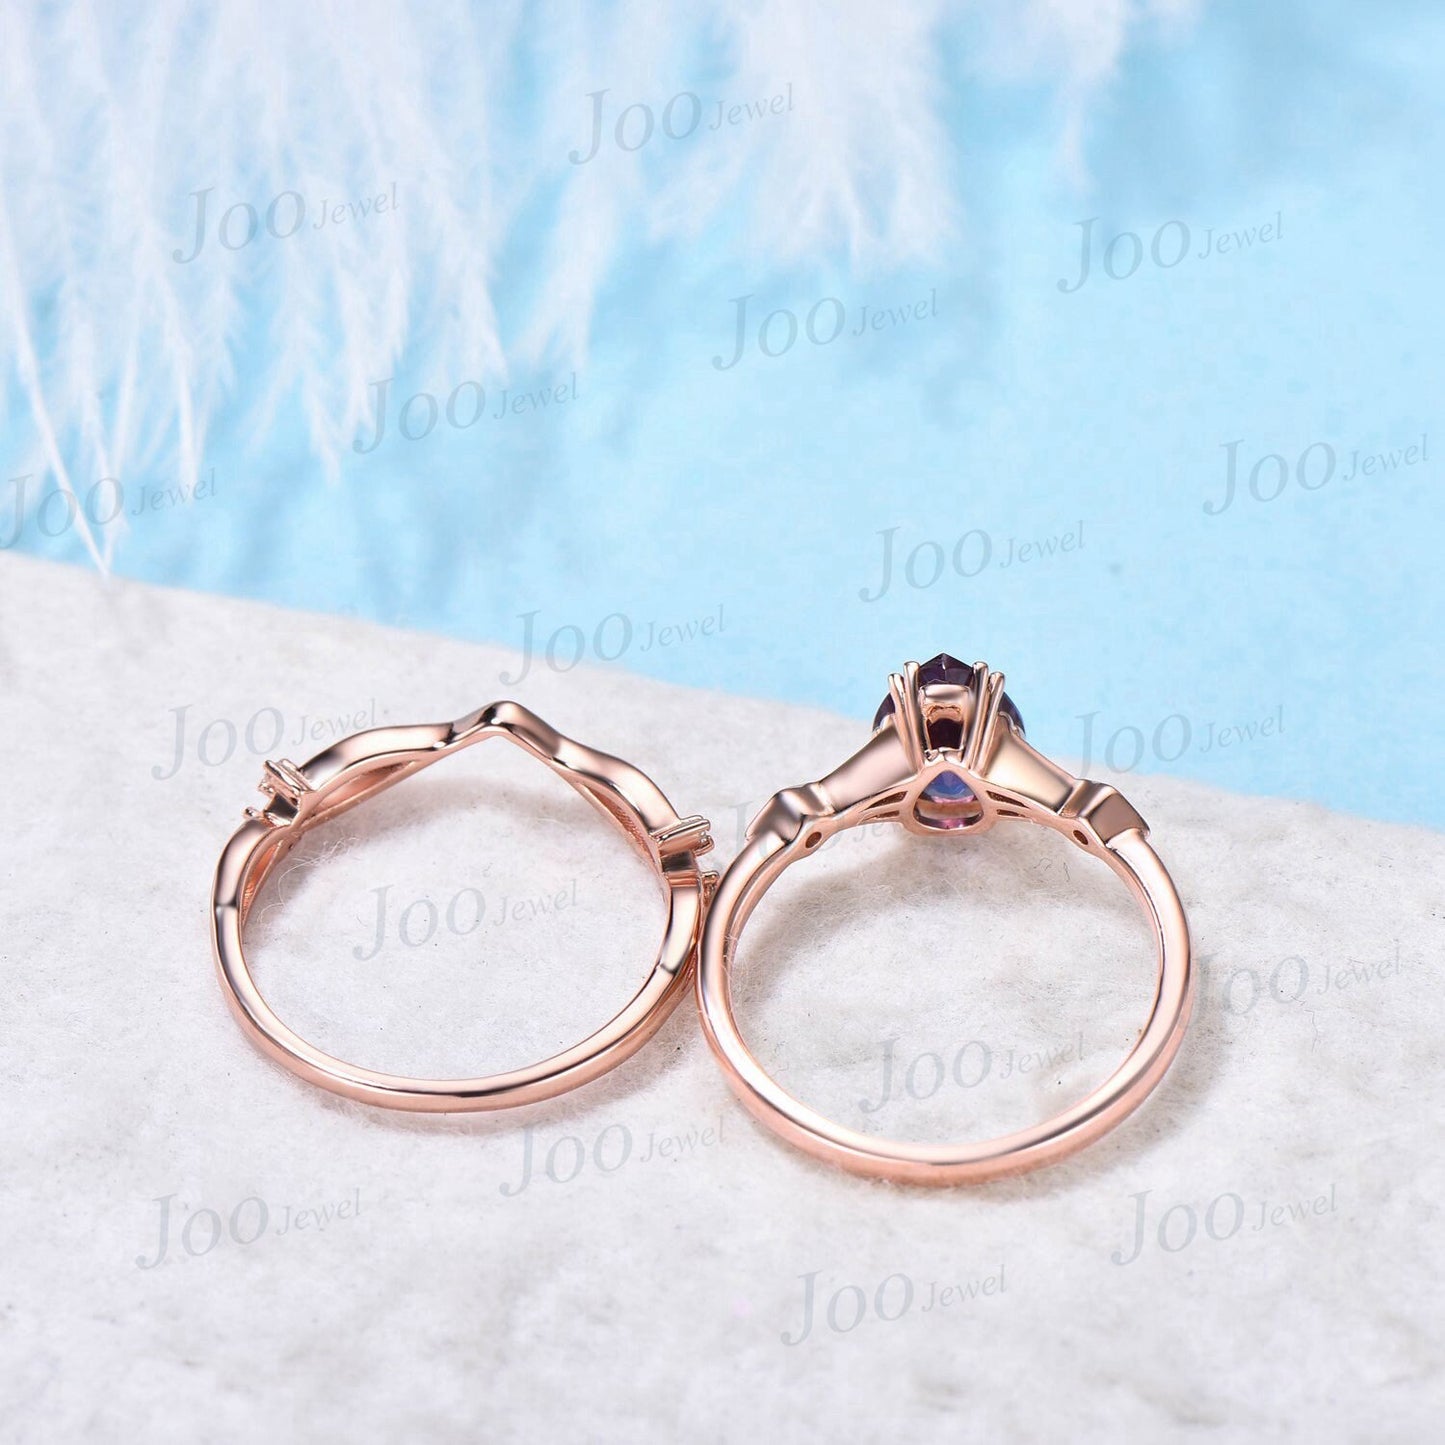 1.25ct Opal Engagement Ring Set Vintage Rose Gold Pear Shaped Opal Wedding Ring Unique October Birthstone Twig Vine Band Anniversary Gifts